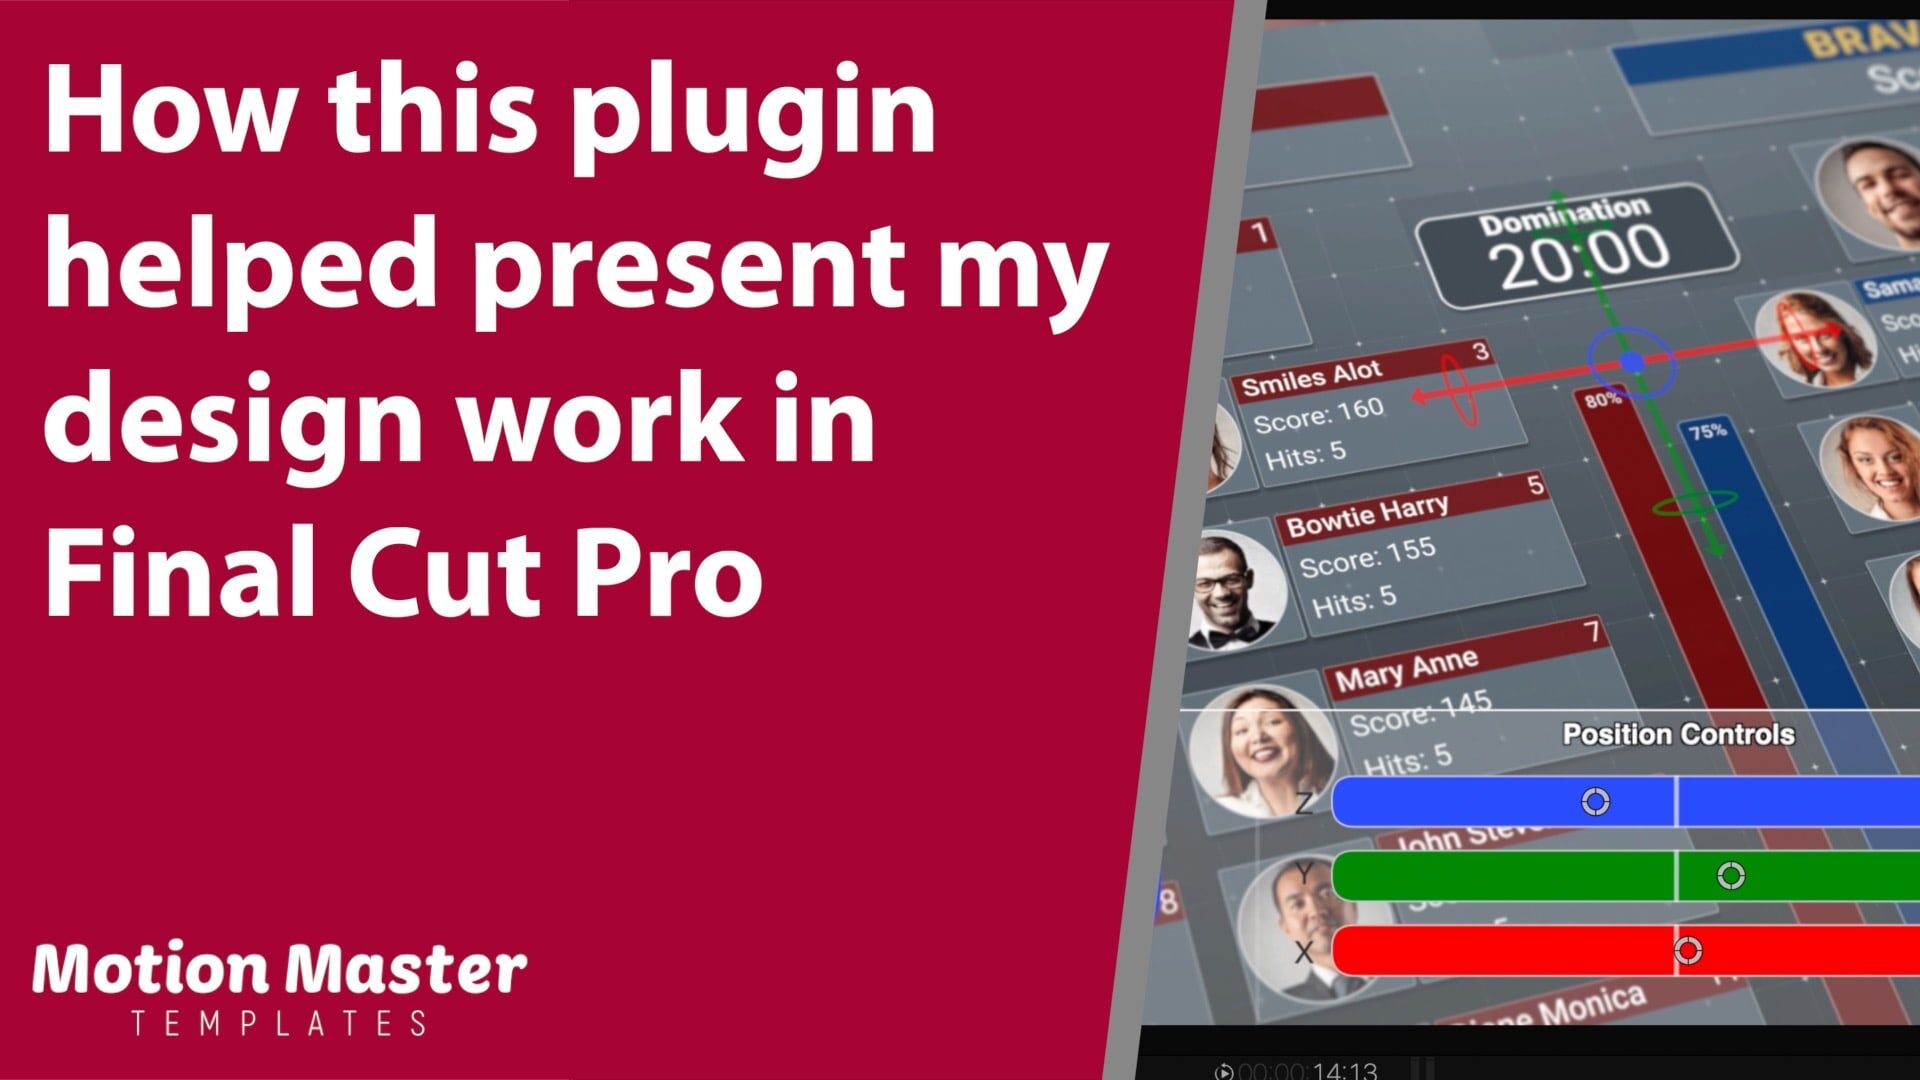 How this plugin helped present my design work | Motion Master Templates | How this plugin helped present my design work | Animation Templates for Apple’s Final Cut & Motion Software